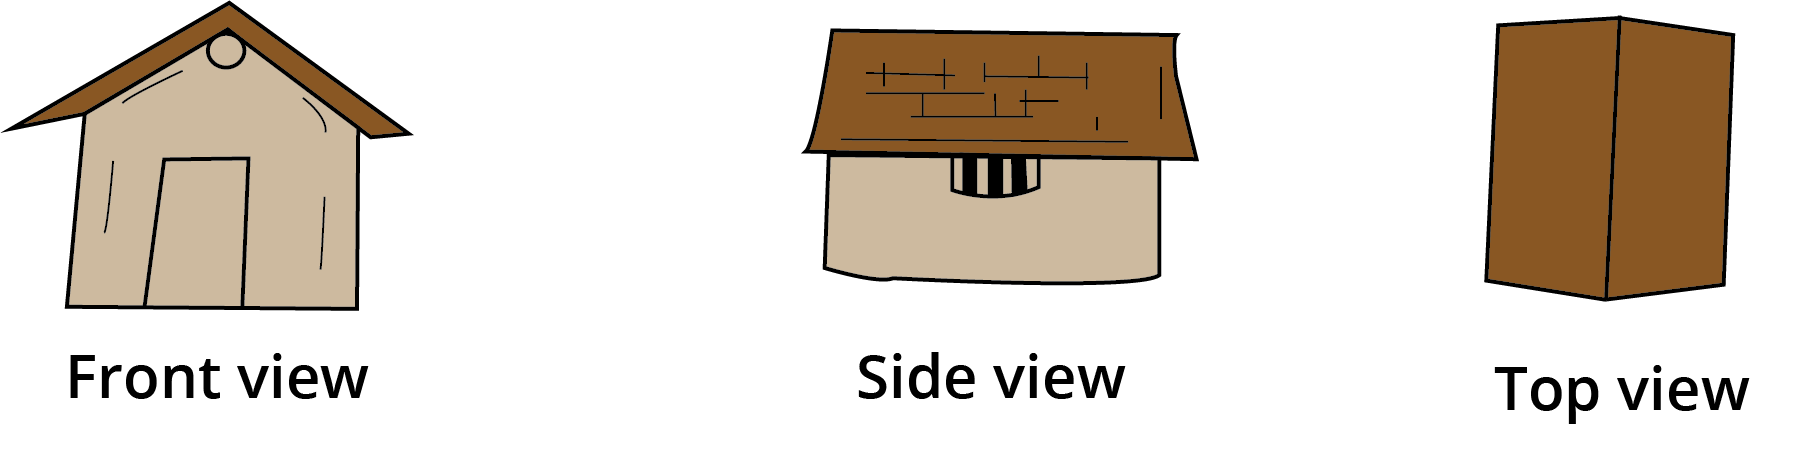 Front view, side view and top view of a hut